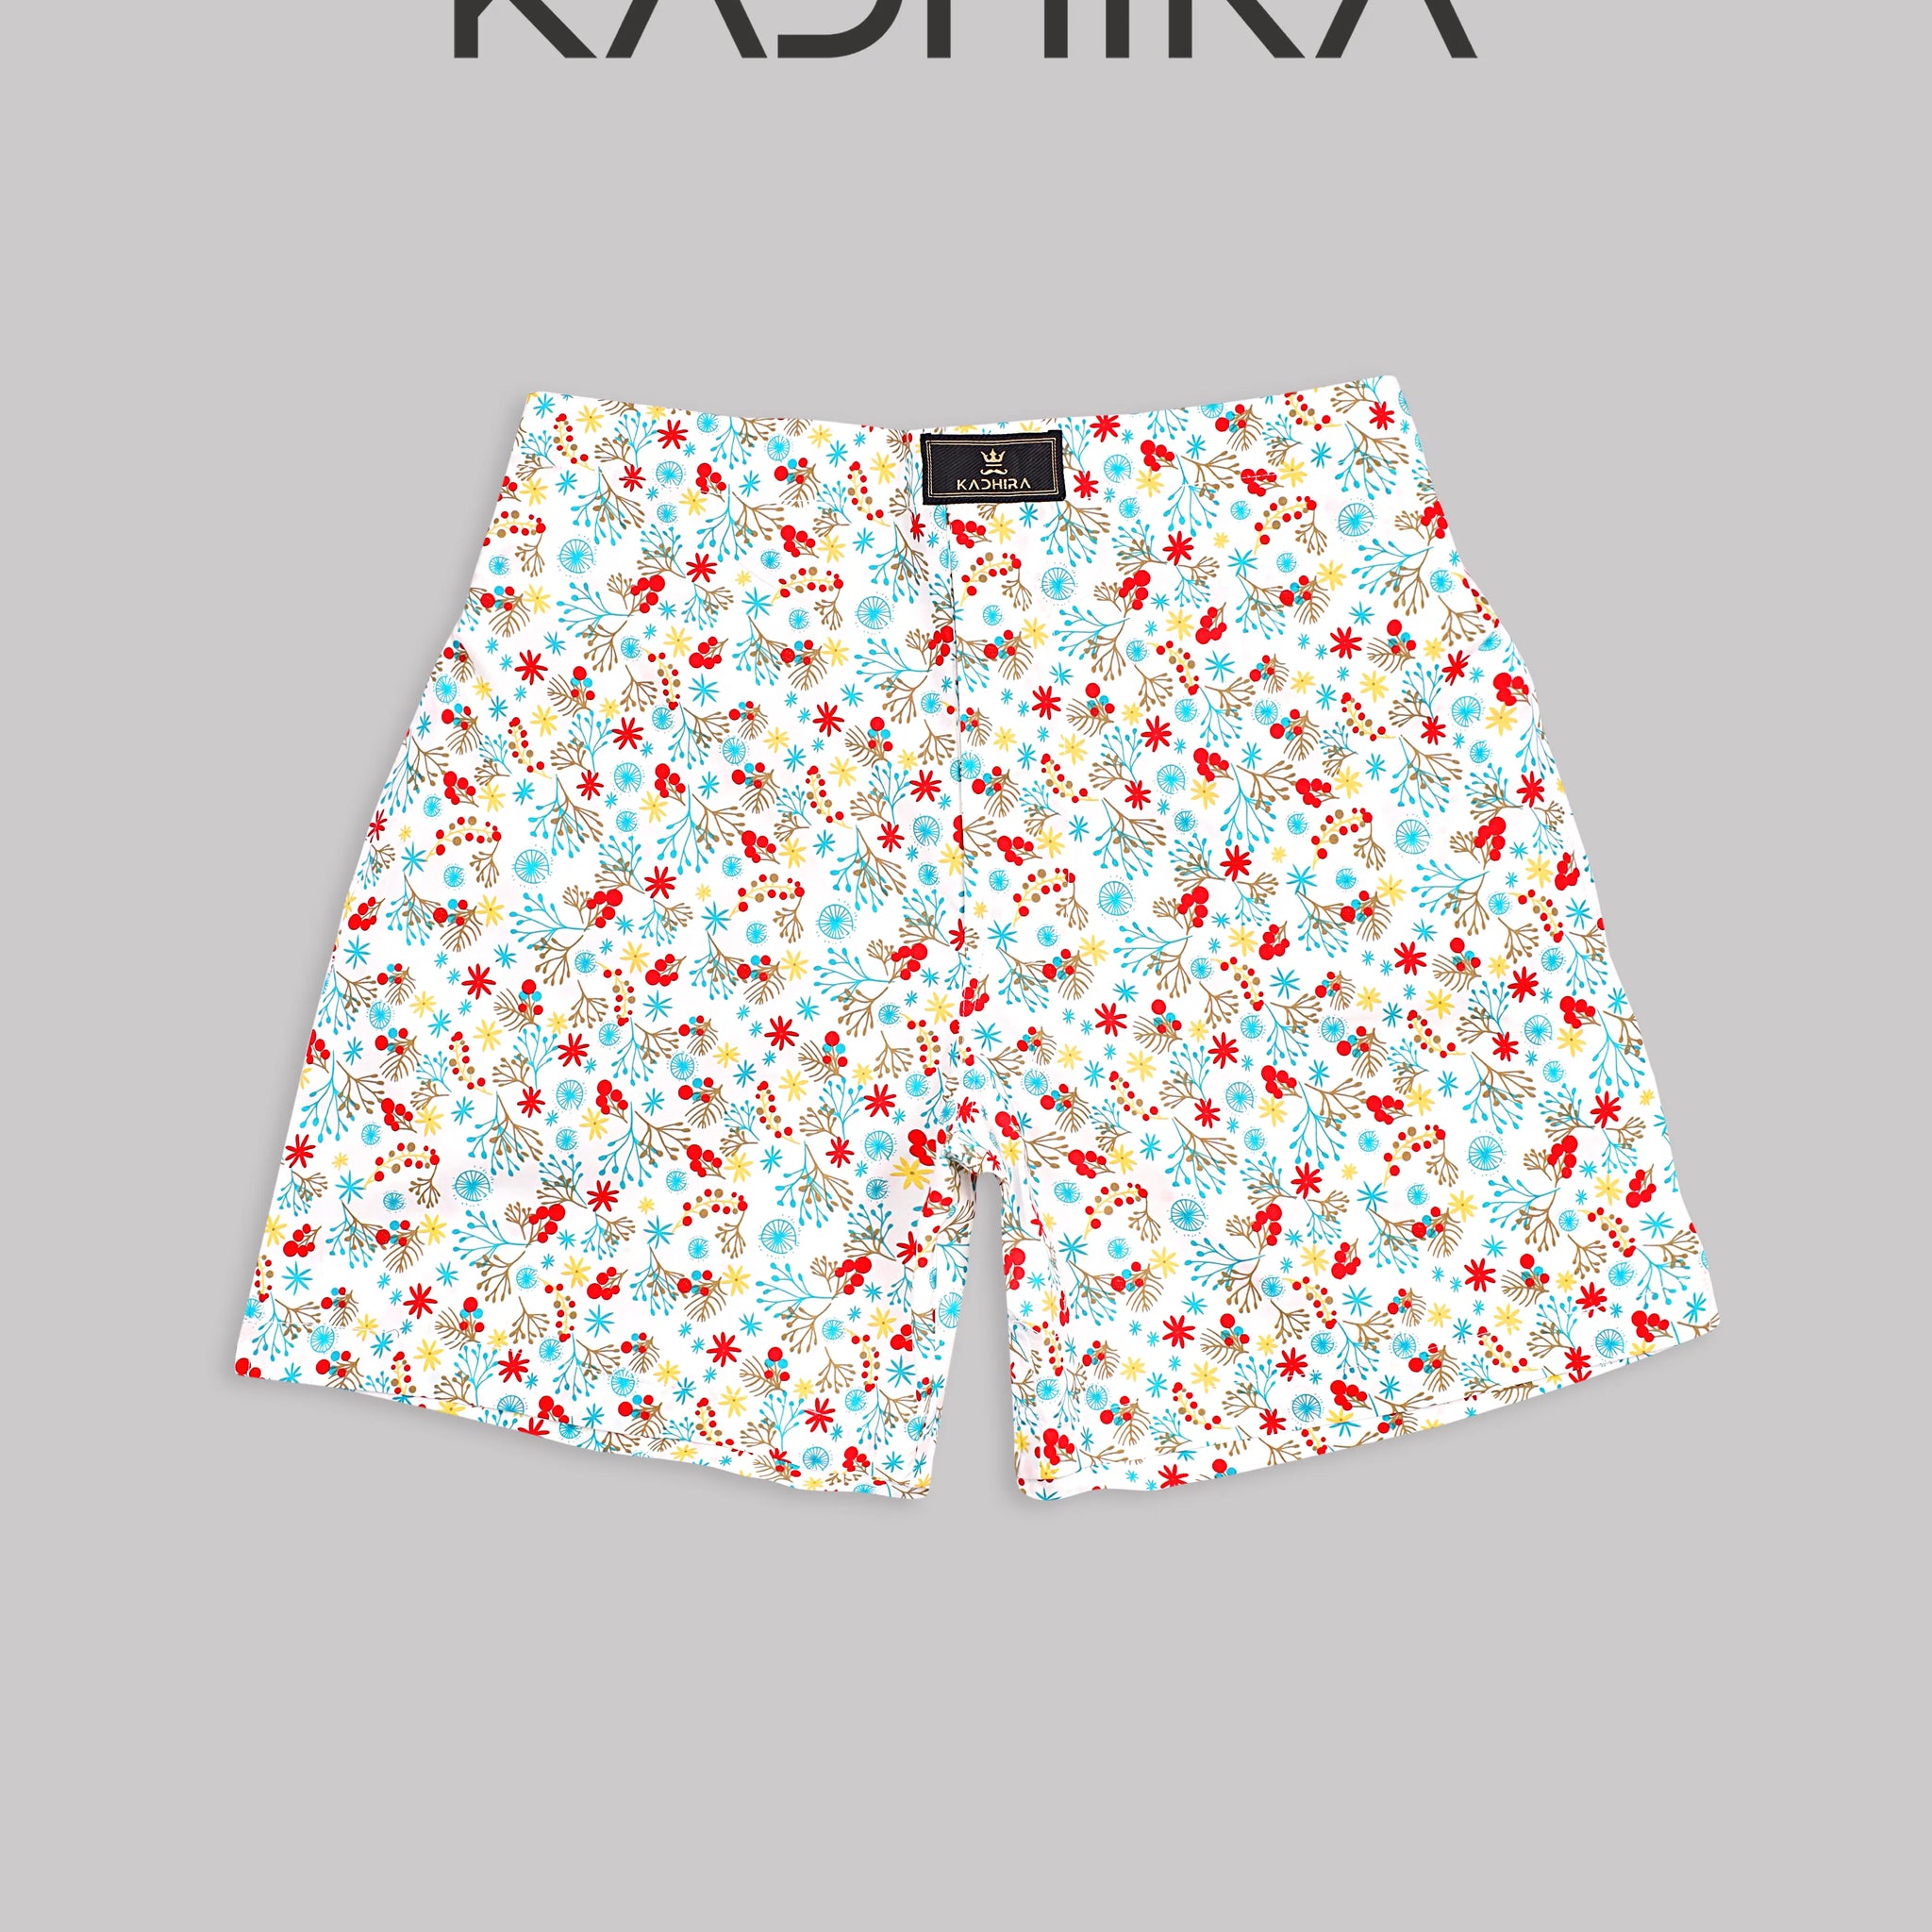 Bright White With Red-Blue Flower Printed Premium Cotton Boxer